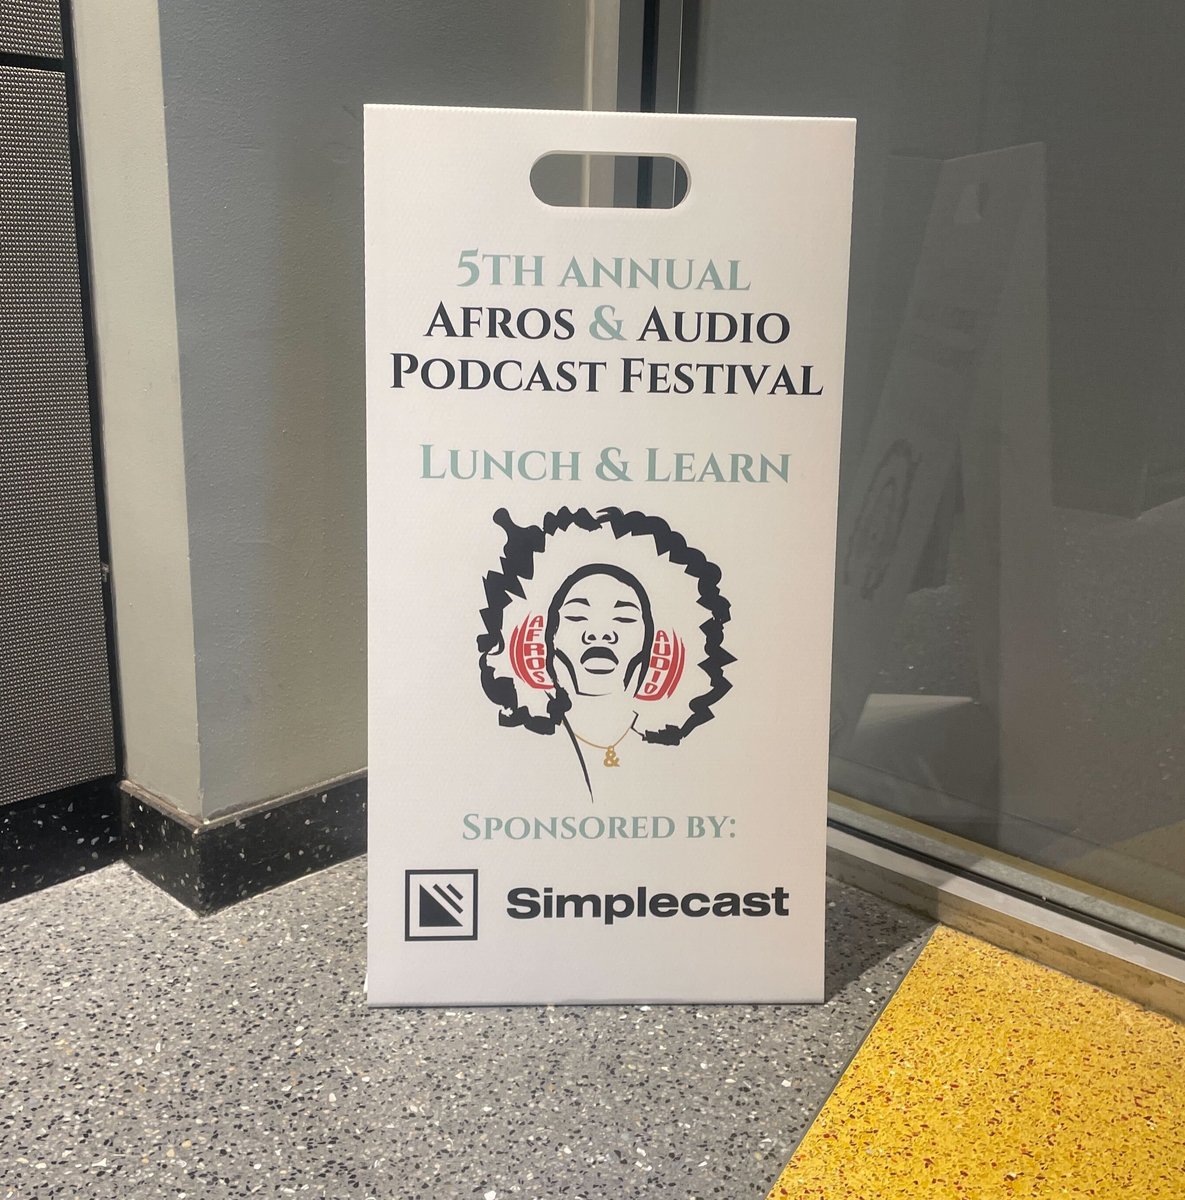 A sign at Afros & Audio that says: 5th Annual Afros & Audio Podcast Festival Lunch and Learn. Sponsored by Simplecast.